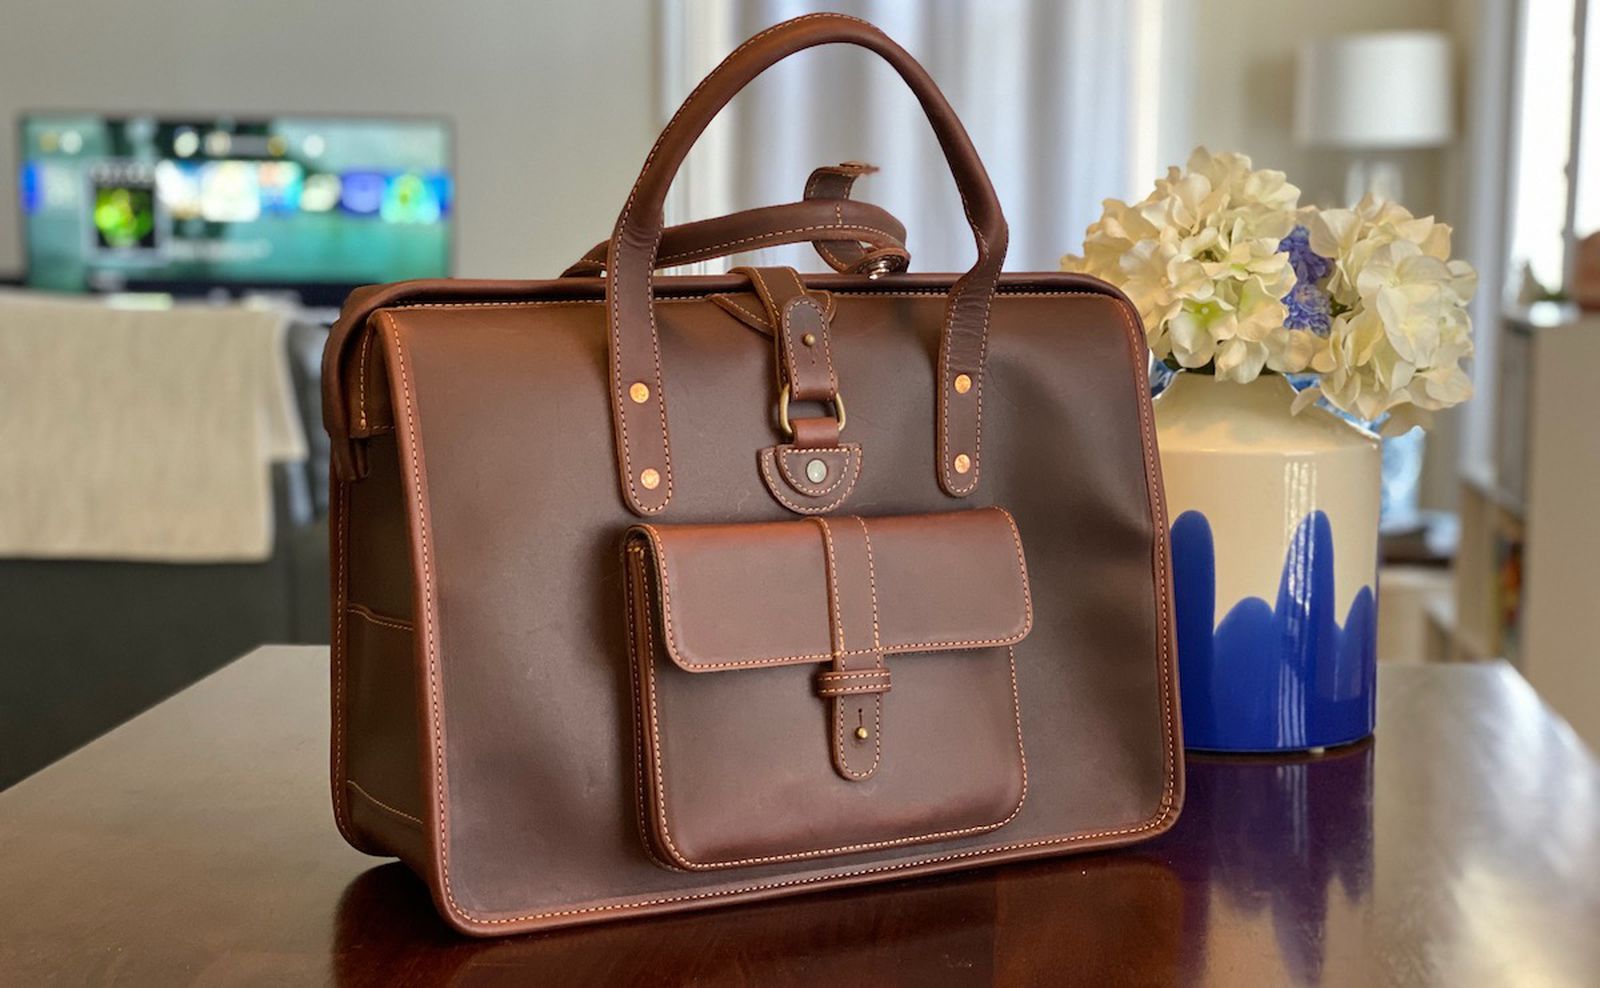 The Pad & Quill Gladstone Briefcase offers plenty of storage in a